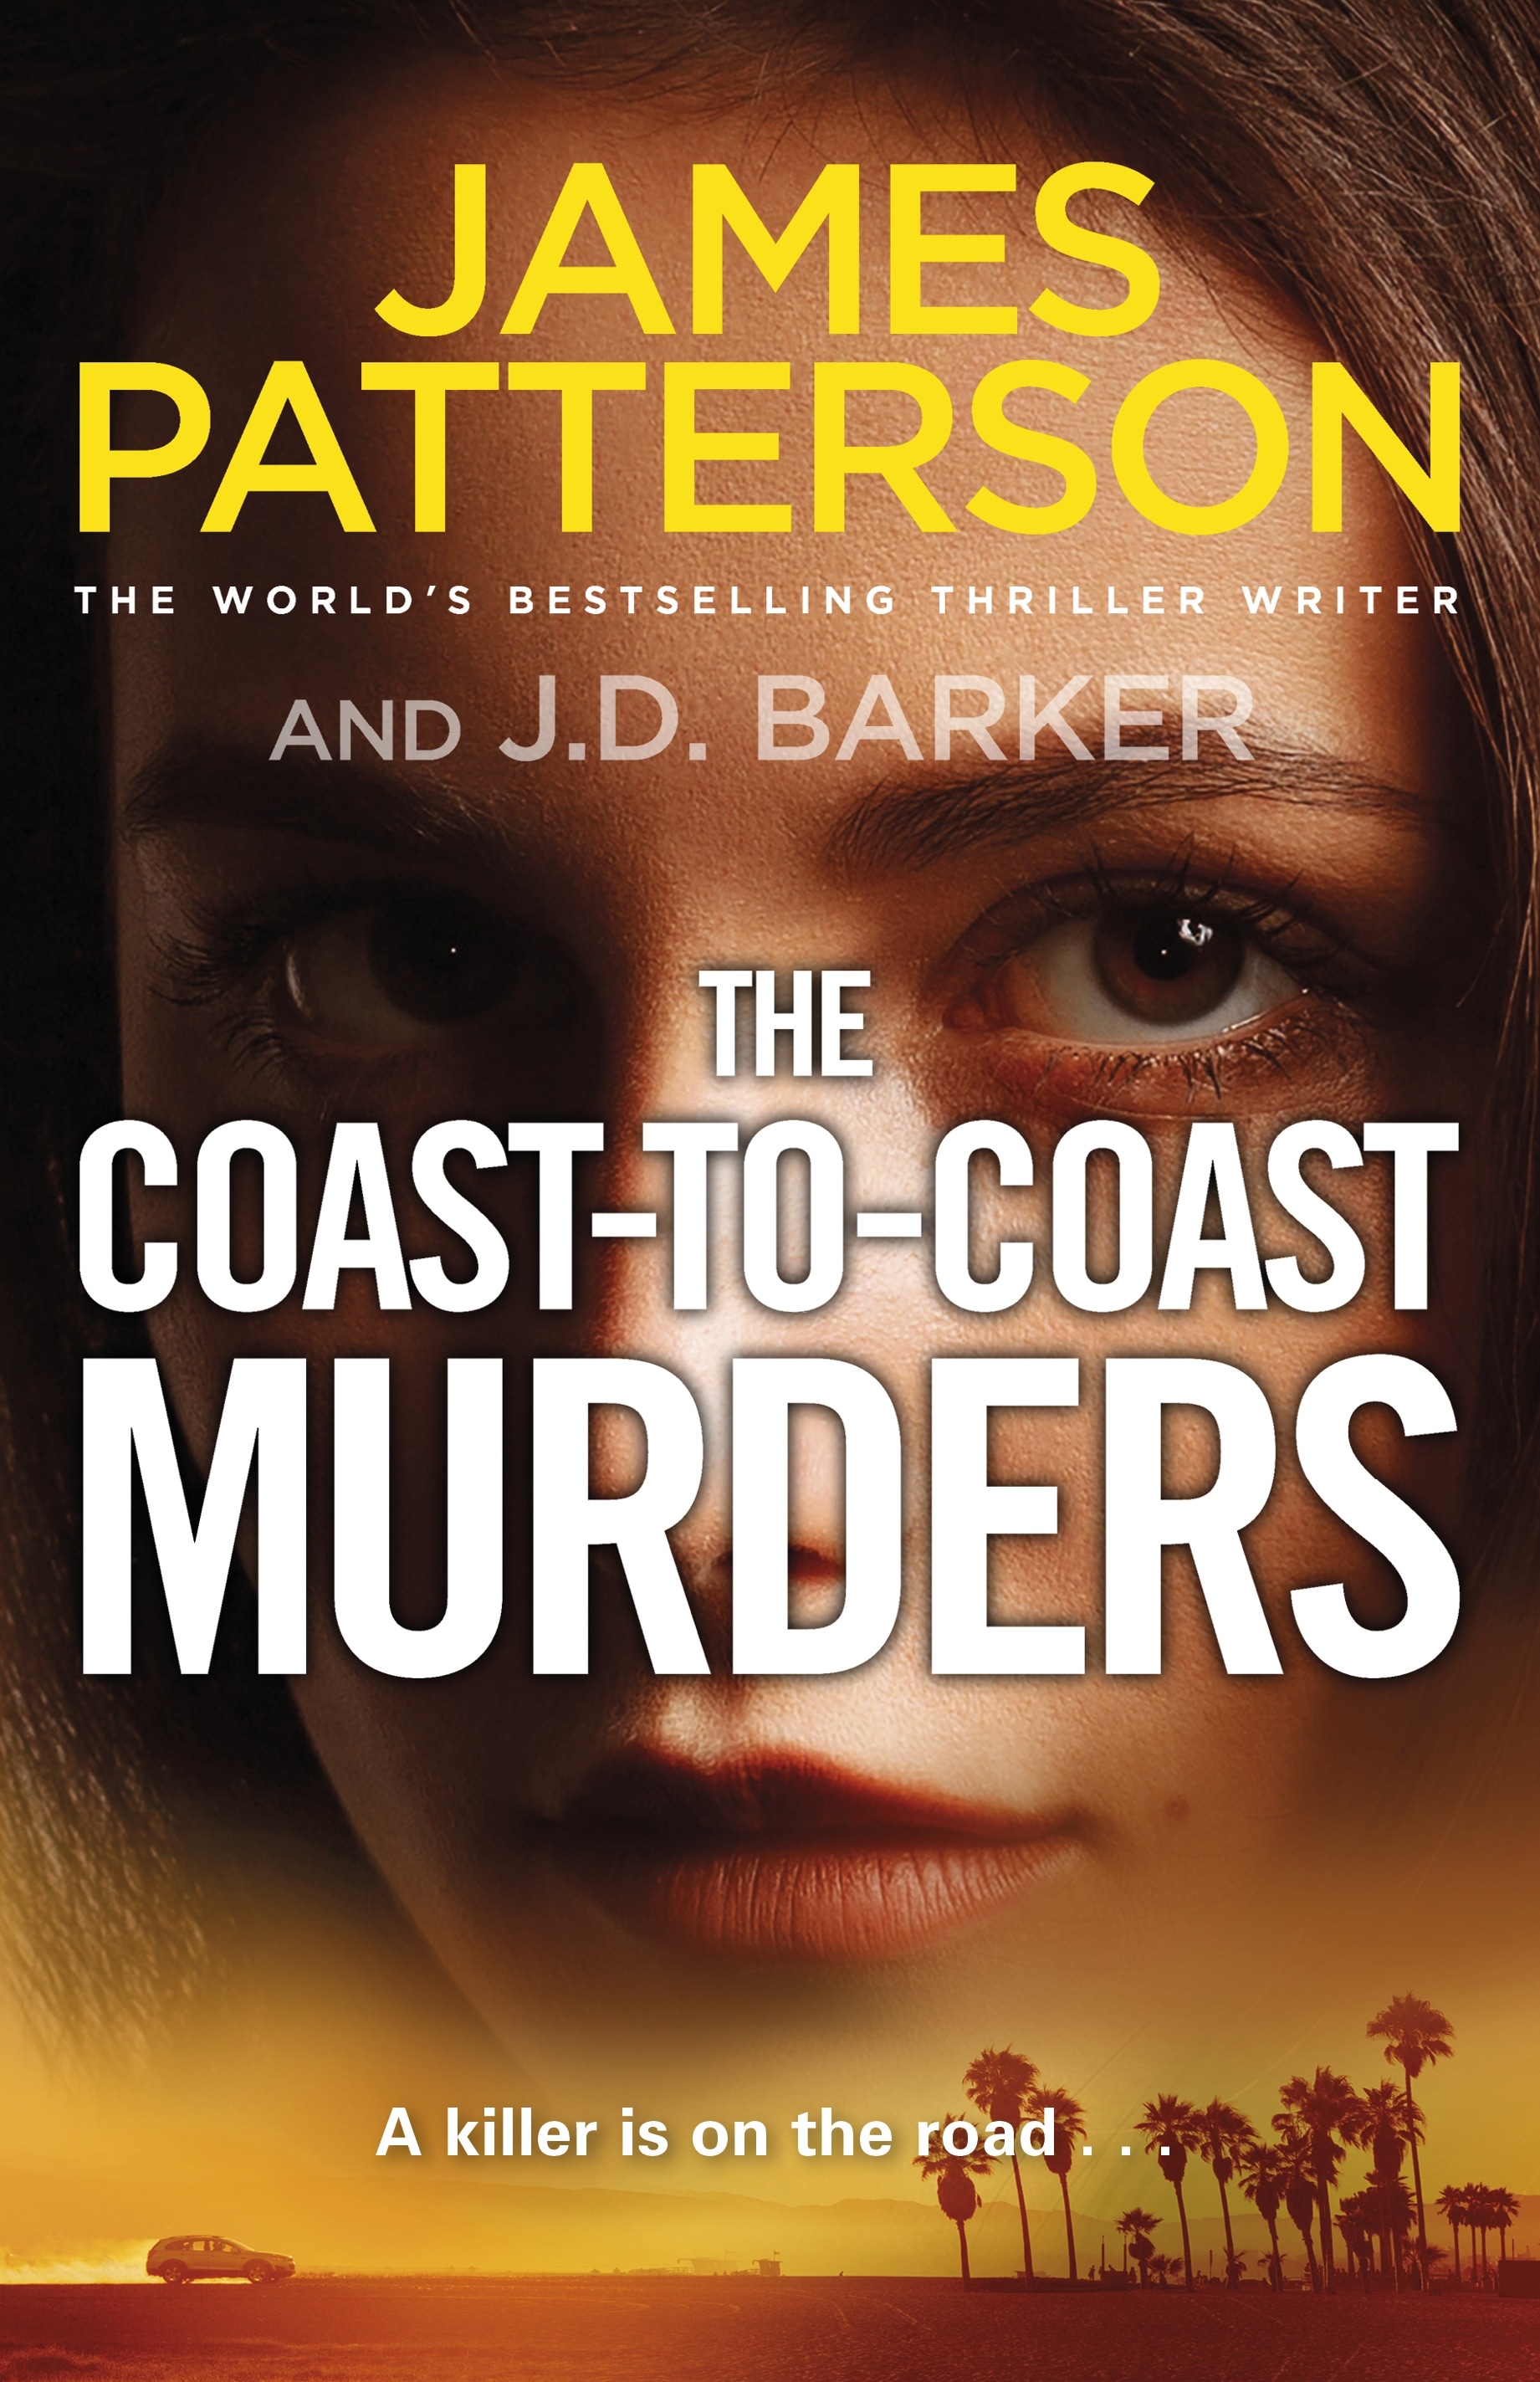 Book “The Coast-to-Coast Murders” by James Patterson — October 1, 2020